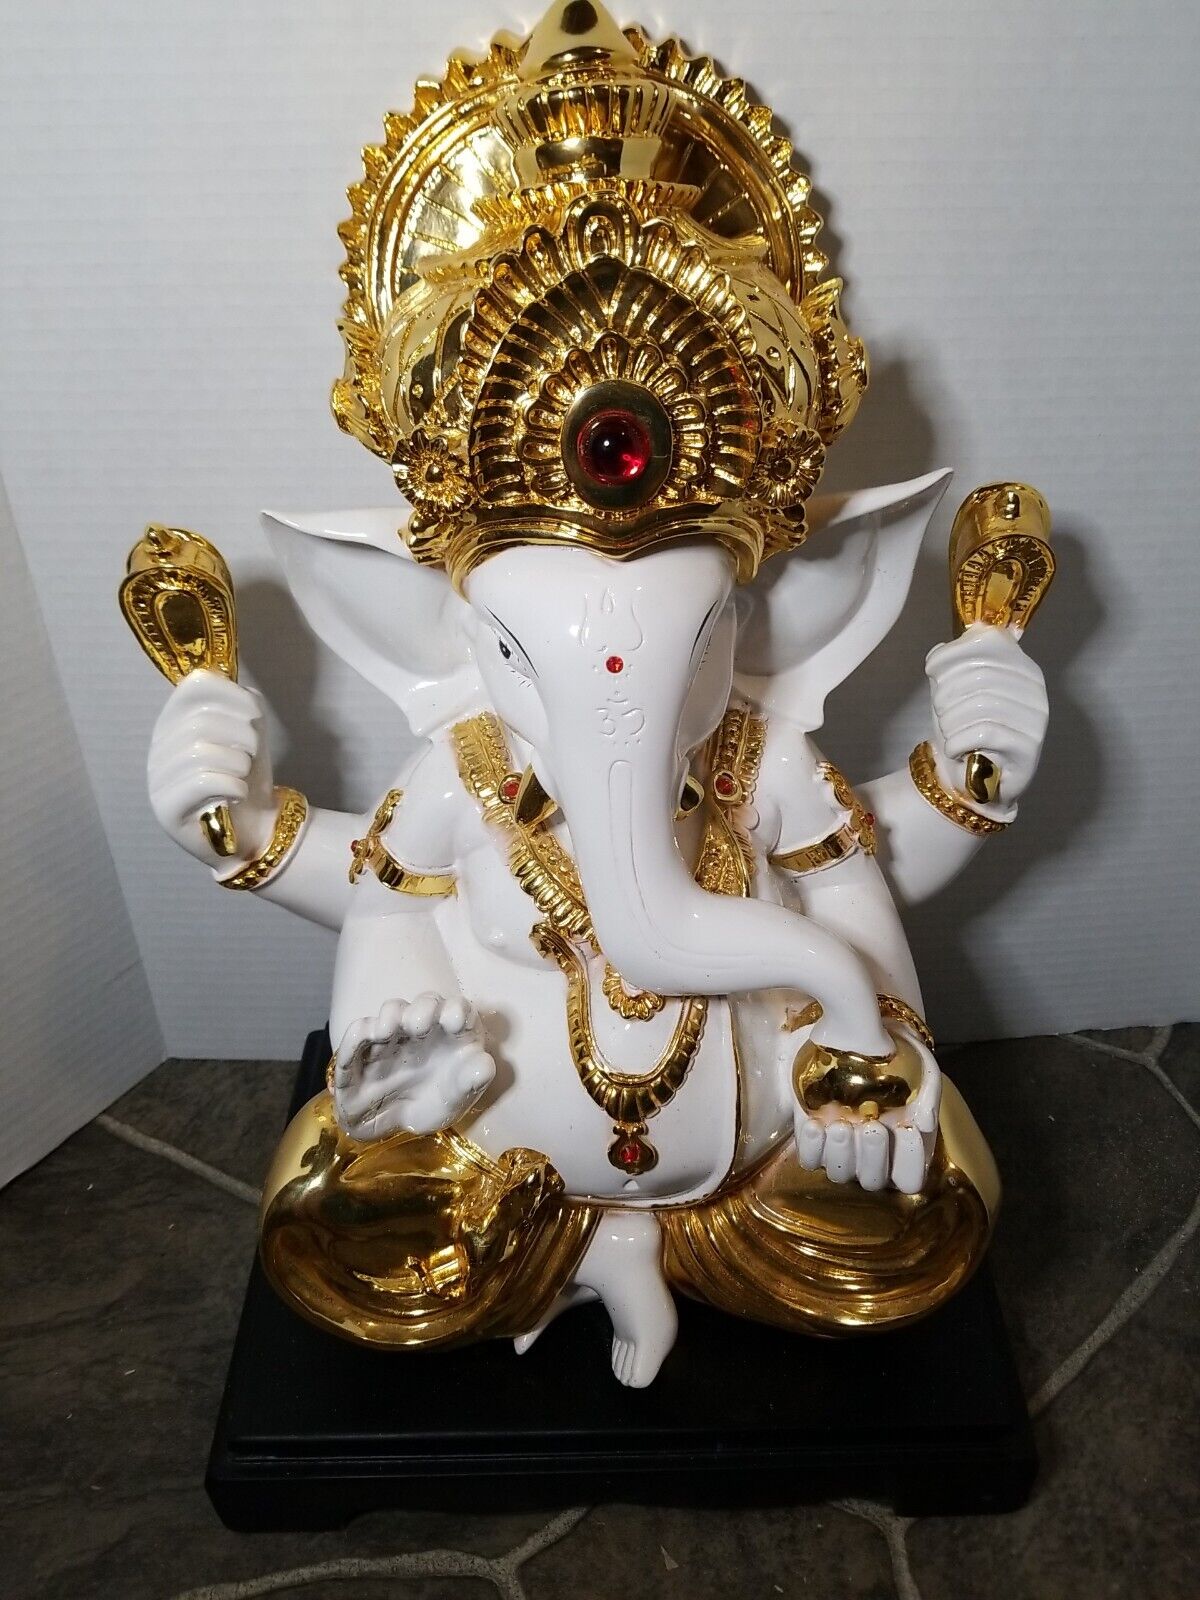 Lord Ganesha Buddha Resin Statue 18 Inch Gold Tone And Red Accent Rhinestones